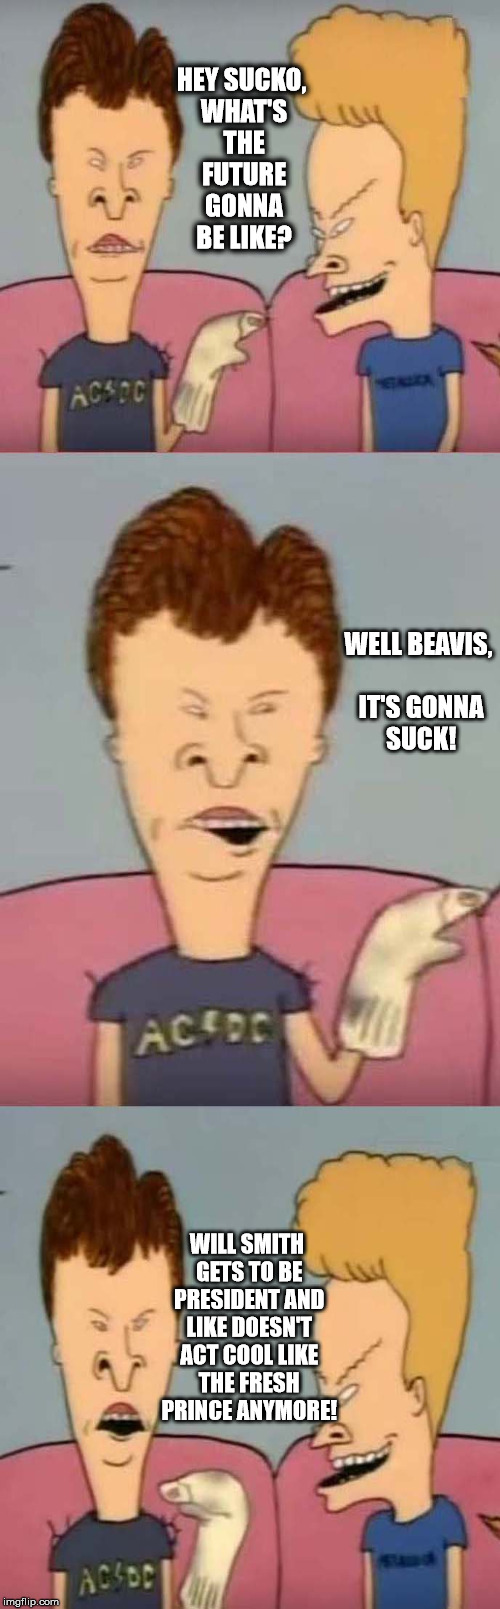 Beavis future | HEY SUCKO, WHAT'S THE FUTURE GONNA BE LIKE? WELL BEAVIS, IT'S GONNA SUCK! WILL SMITH GETS TO BE PRESIDENT AND LIKE DOESN'T ACT COOL LIKE THE FRESH PRINCE ANYMORE! | image tagged in beavis and butthead,future,sleep deprivation creations | made w/ Imgflip meme maker